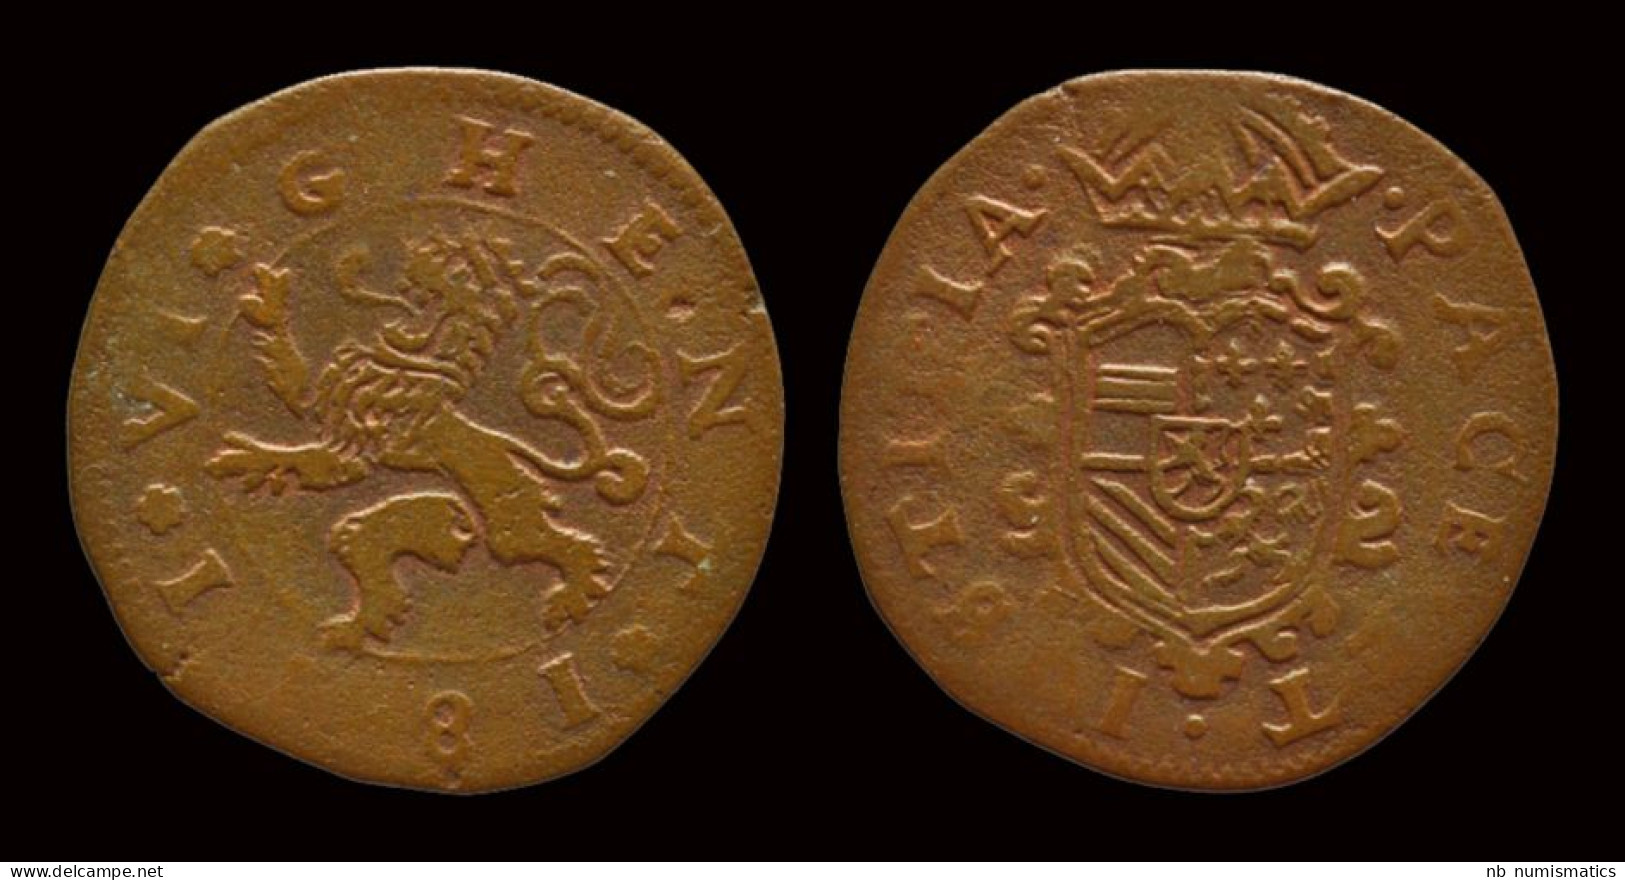 Southern Netherlands The City Of Gent Under Filips II 6 Mijt 1581 - 1556-1713 Pays-Bas Espagols